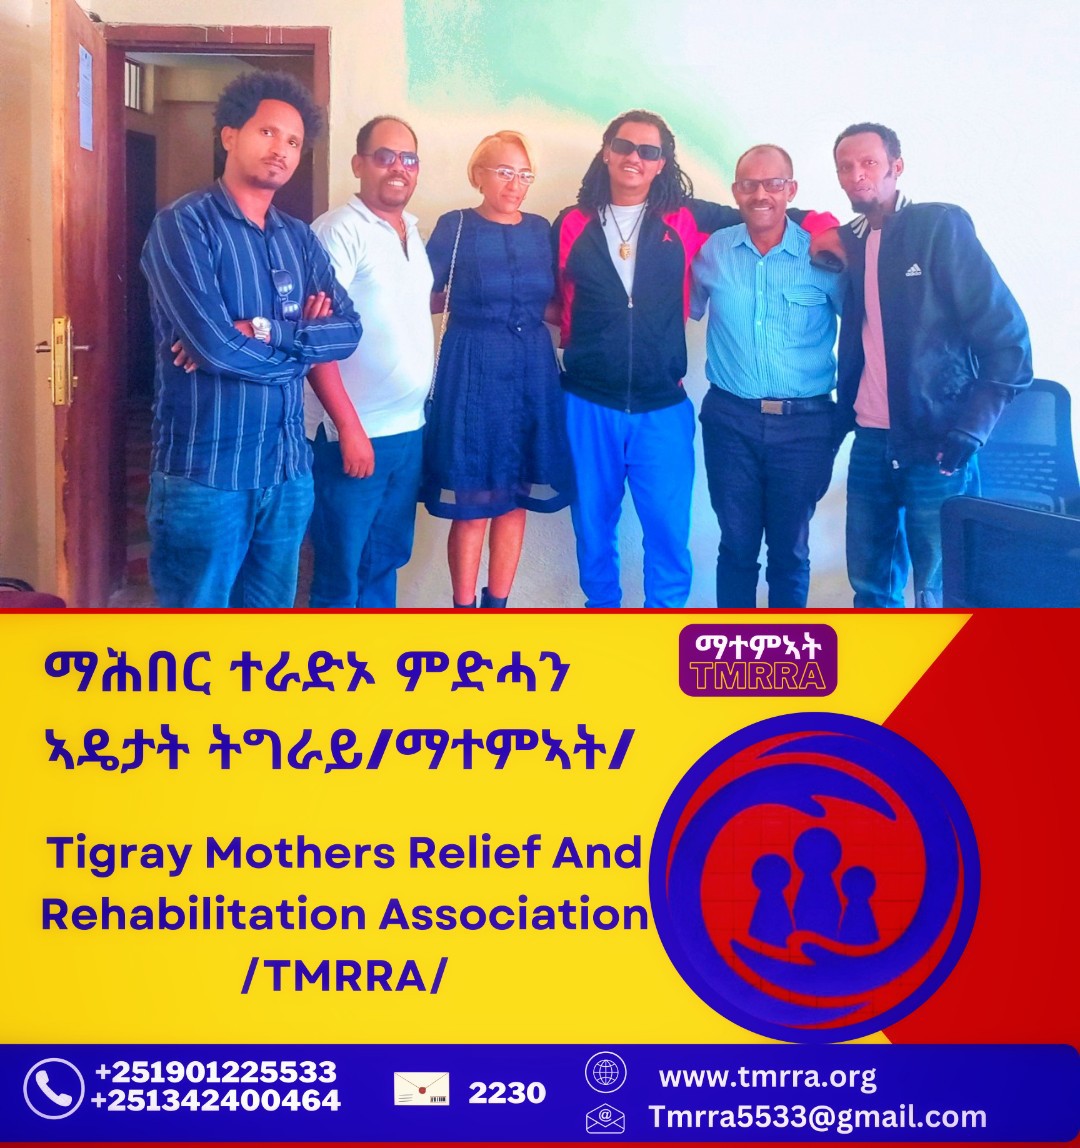 @tmrra5533's executive committee has held a fruitful discussion regarding the upcoming 1st year
anniversary and fundraising, which is going to be celebrated on May 19th, 2024.
#Justice4TigraysWomenAndGirls
@lrobta @Abity_26